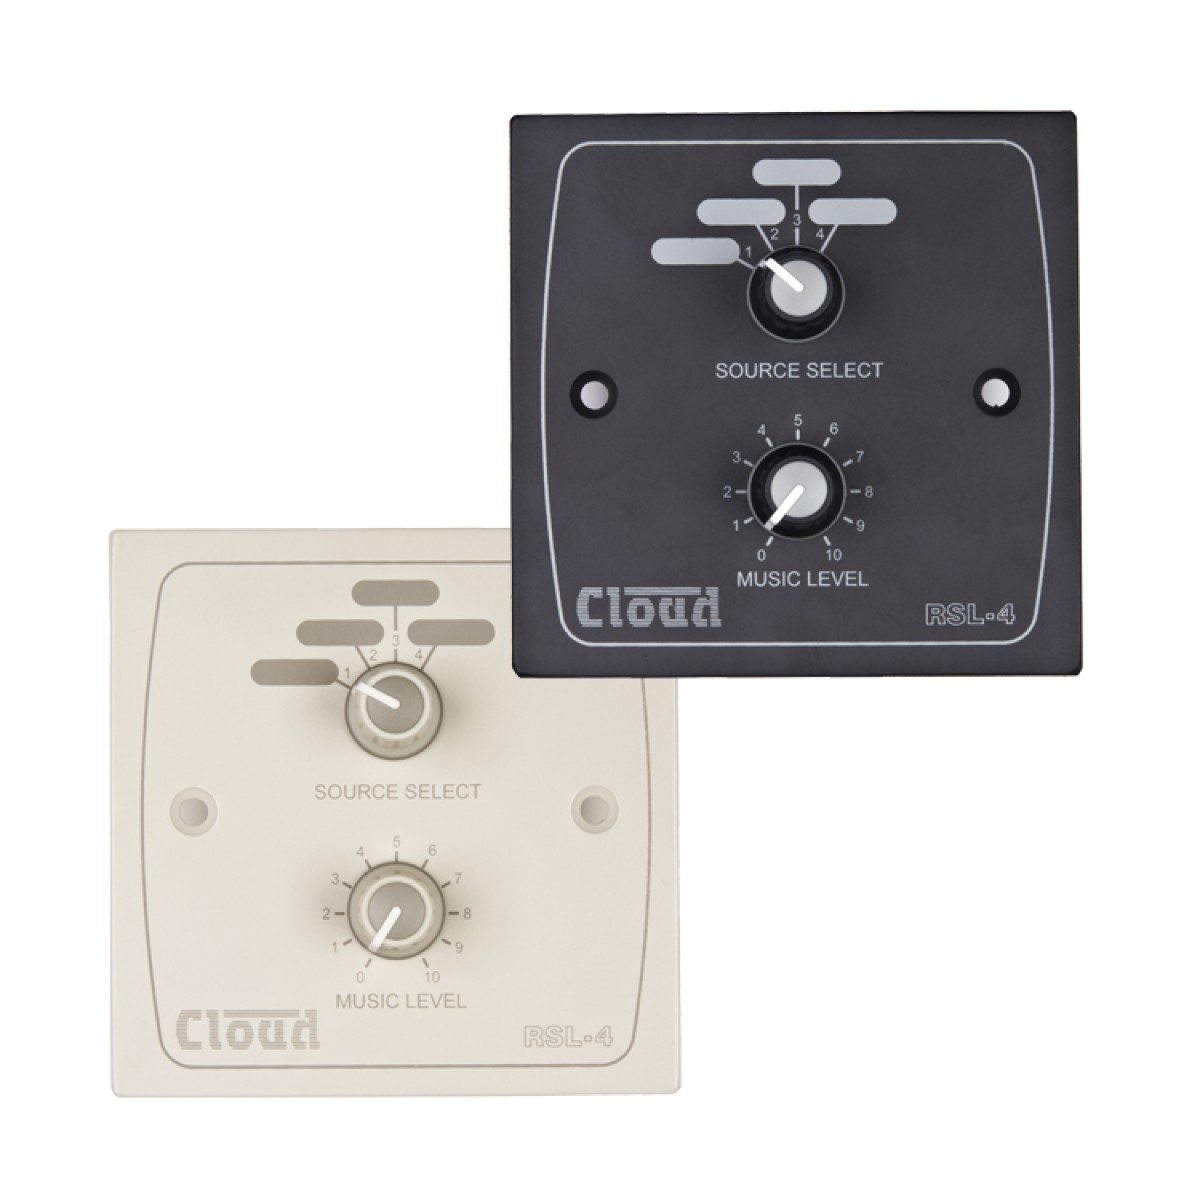 RSL-4W & RSL-4B Remote Source / Volume Level Select Plate